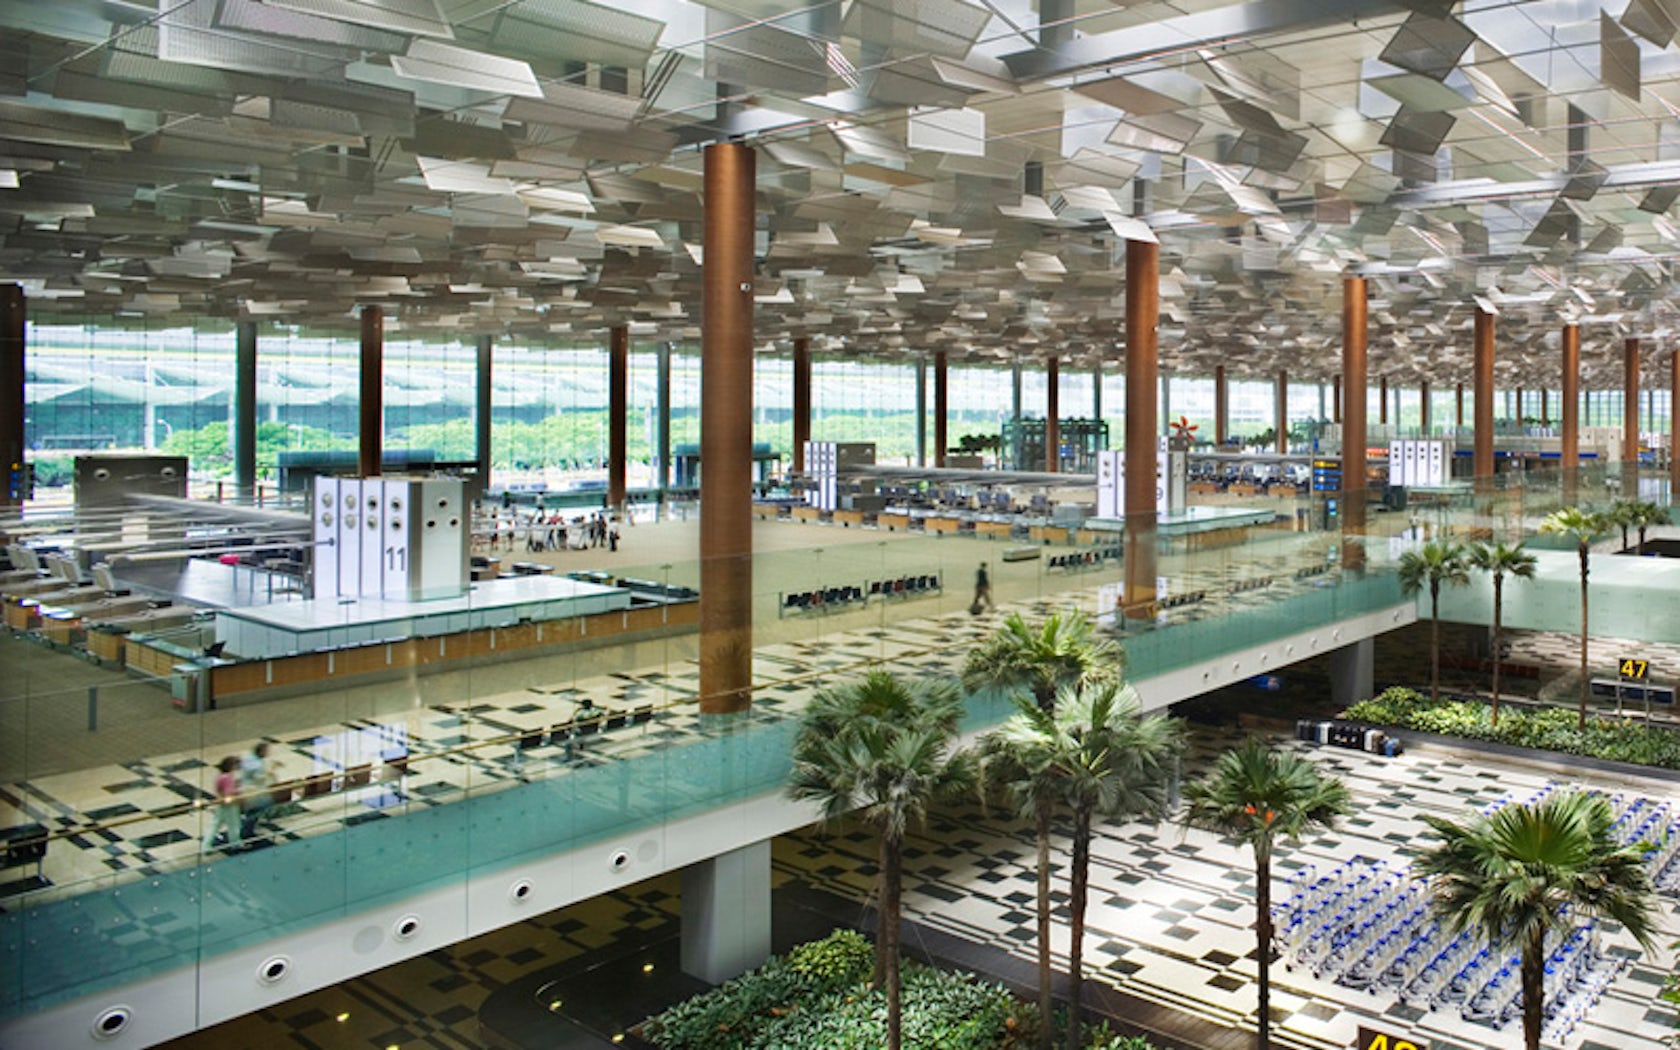 File:Ceiling of Changi Airport T3.jpg - Wikipedia